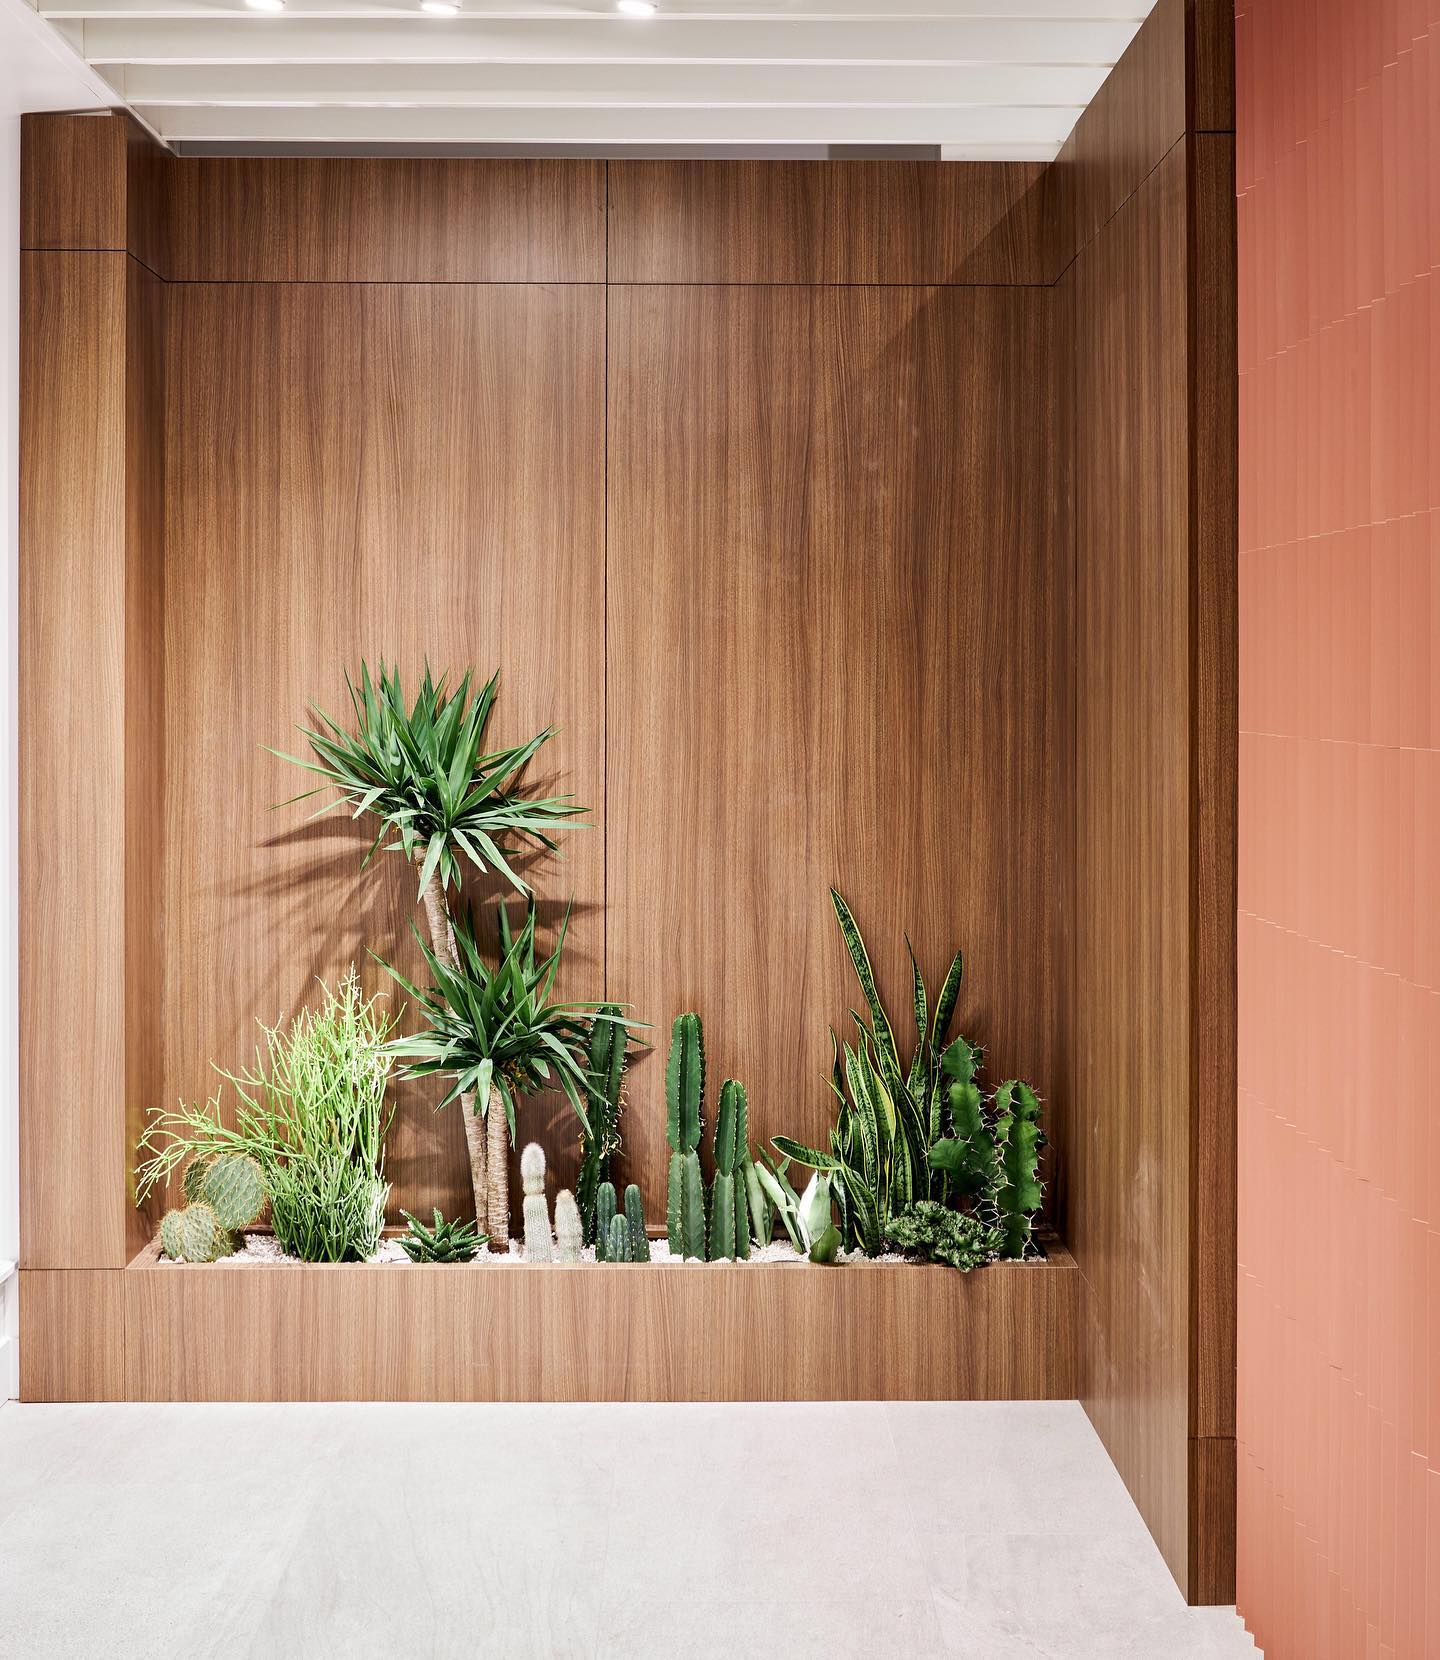 This photo is from one of our recent projects "The Flamingo". Pictured here is the cactus garden located at  the PC entrance. The cactus garden, wood veneer walls,  and 3d wall tile are all elements that will be located throughout  various amenities once the building is complete. The first of 3 towers sold out and is  now in construction. 

#area3design #FlamingoOne #TienSherGroup #whalleydistrict #15mincity #cactusgarden #cactusplants #indoorcactusgarden #lobbyfeaturewall #woodveneerwall #midcenturyinspiration #retroinspired #lobbydesign #interiordesign #interiordesigner #midcenturydesign